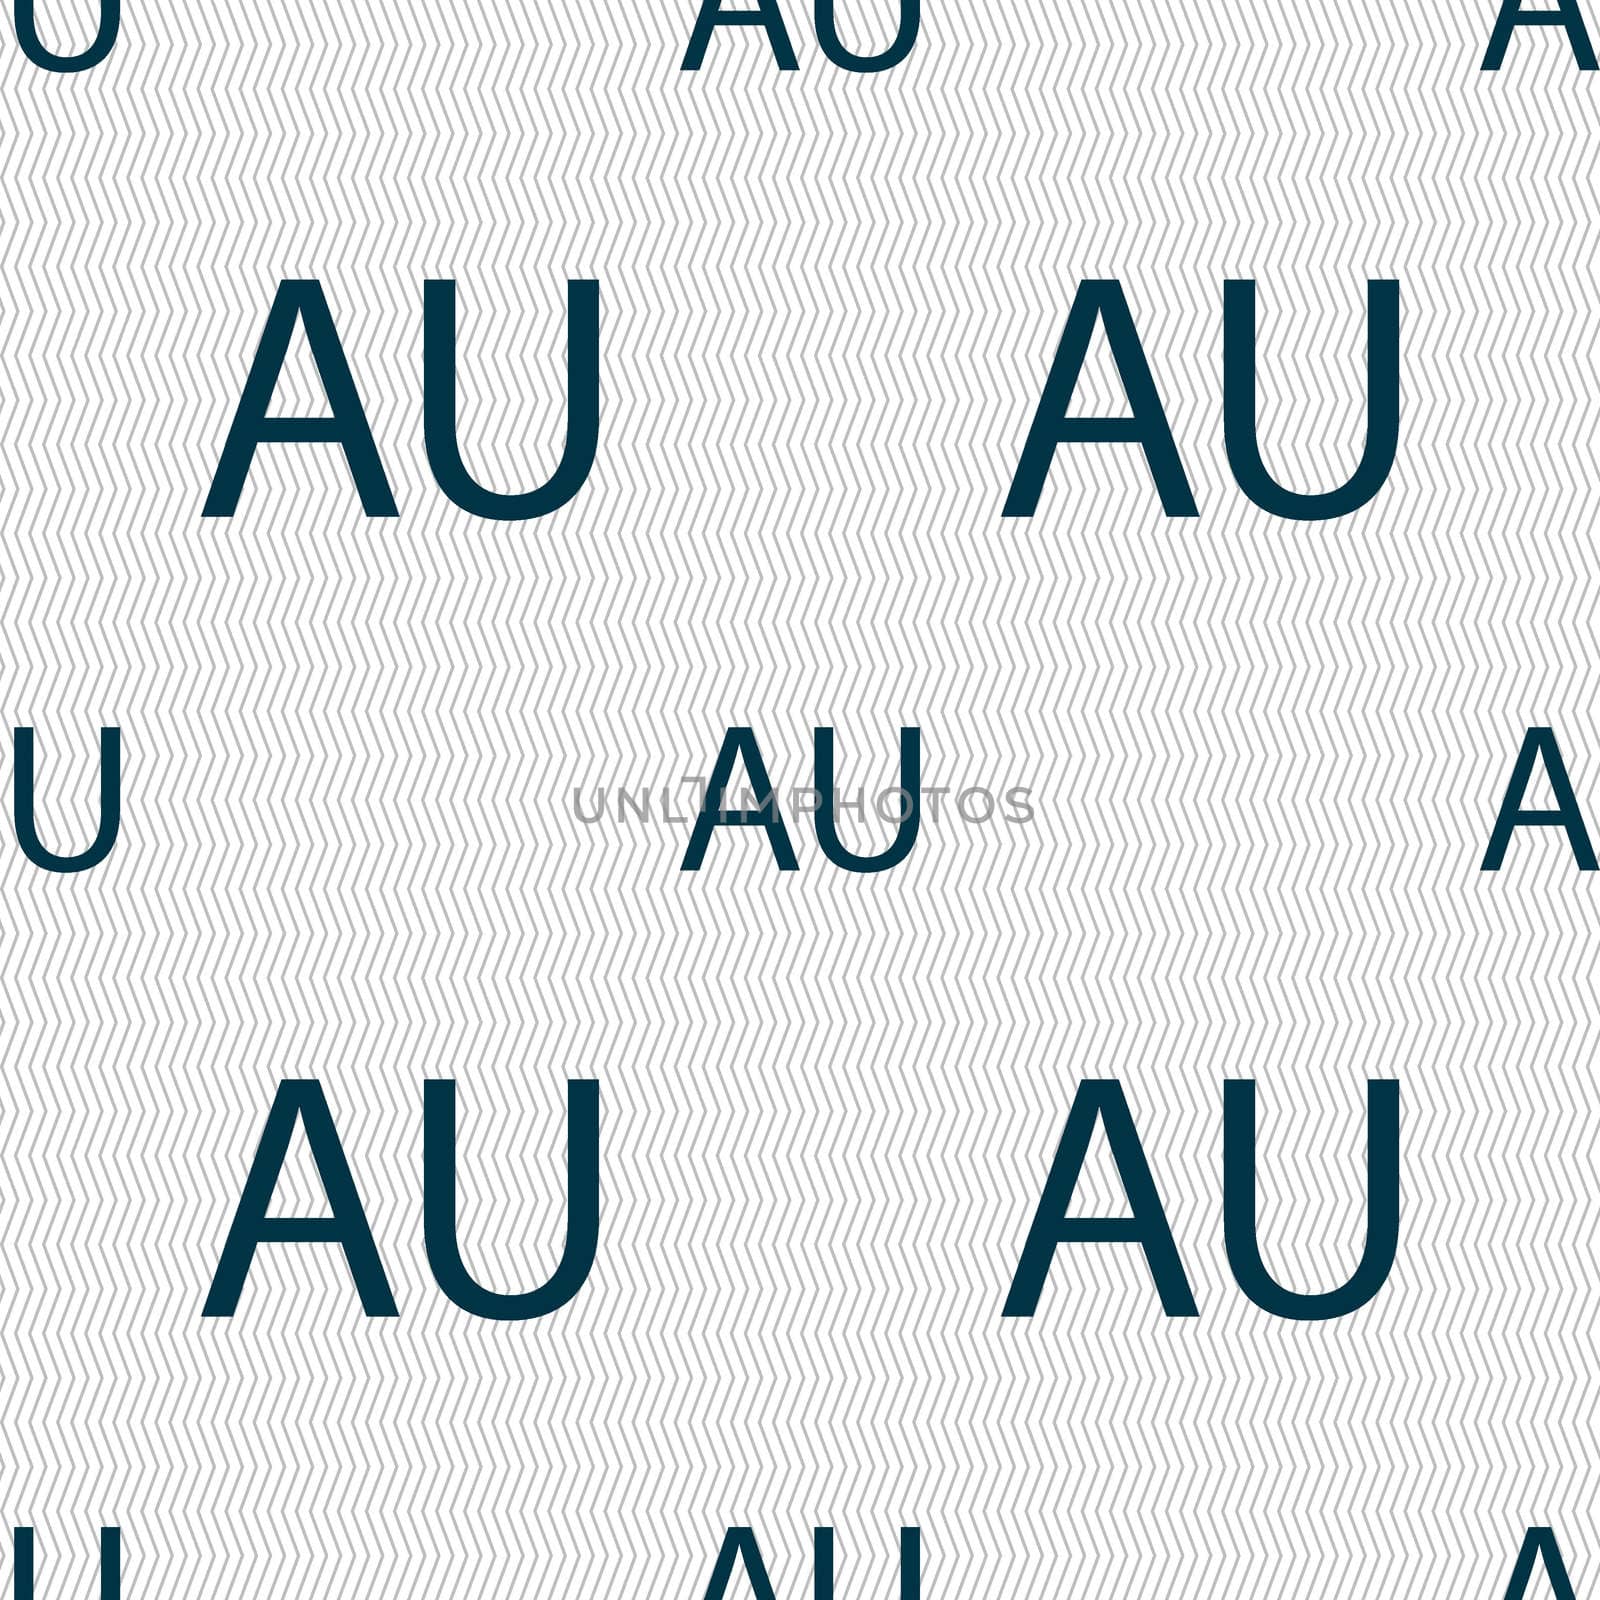 australia sign icon. Seamless abstract background with geometric shapes. illustration